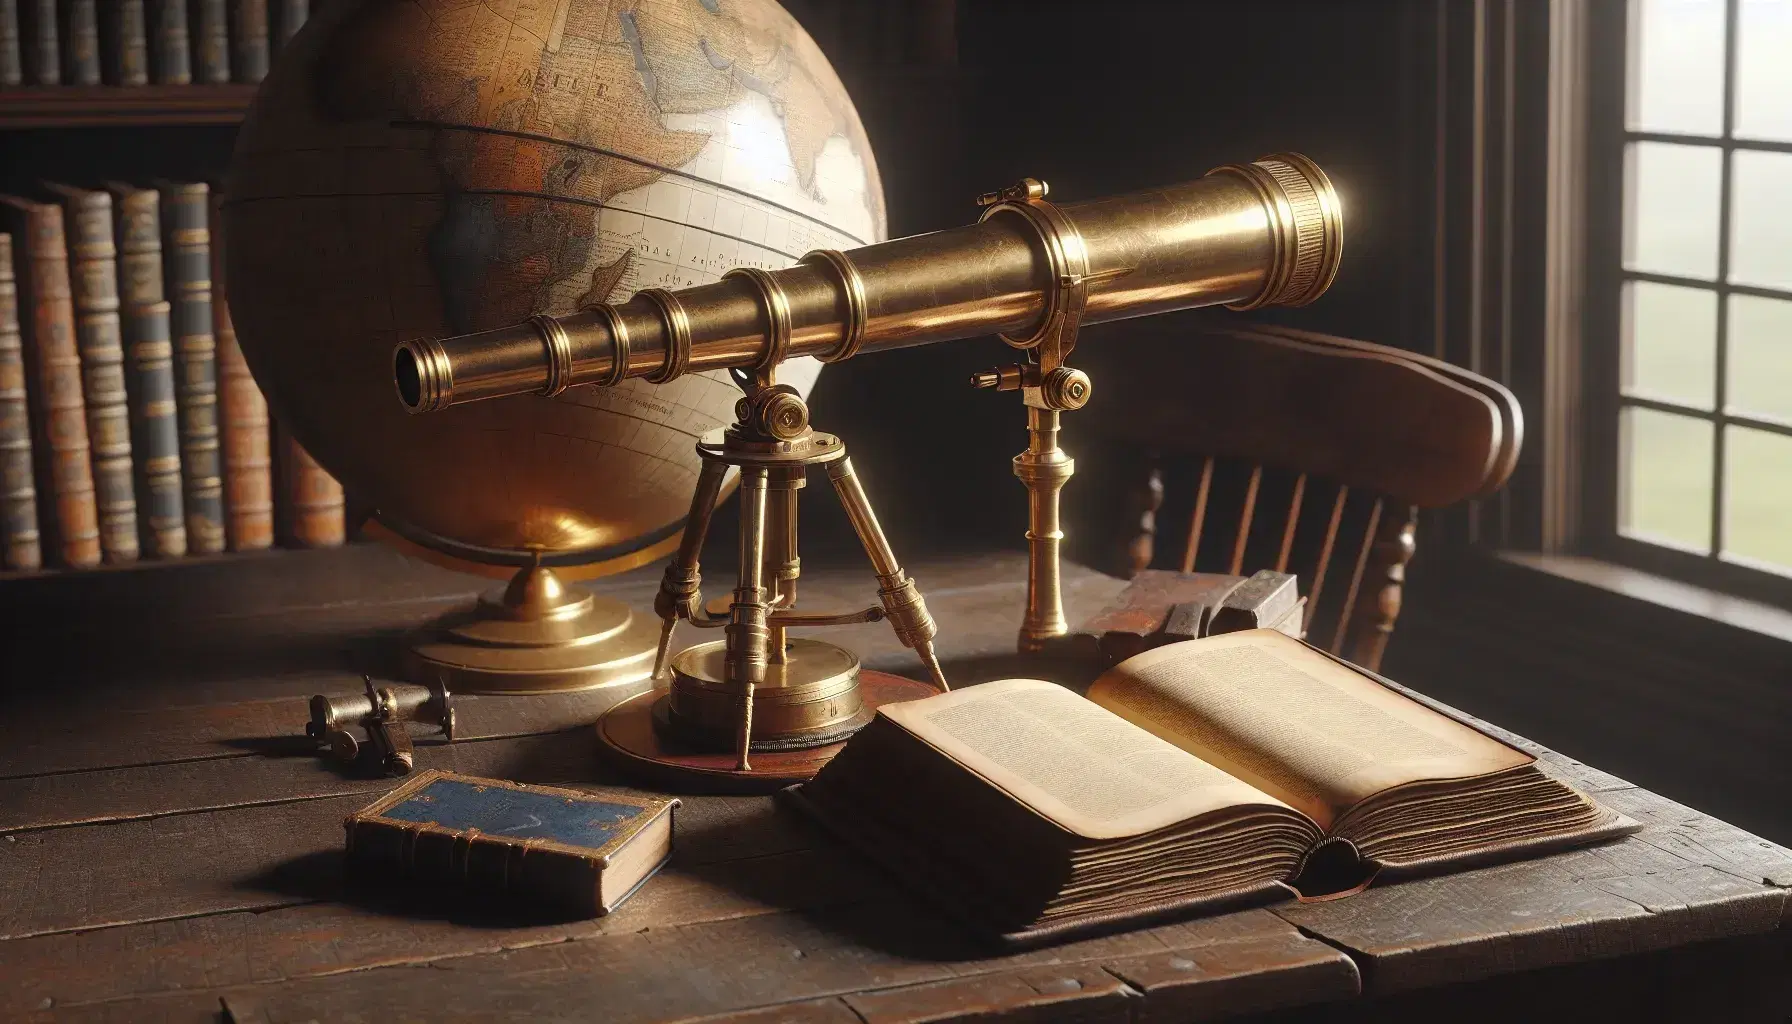 Vintage brass telescope on a wooden table beside an open, leather-bound book and an out-of-focus world globe, in a room with terracotta tiled flooring.